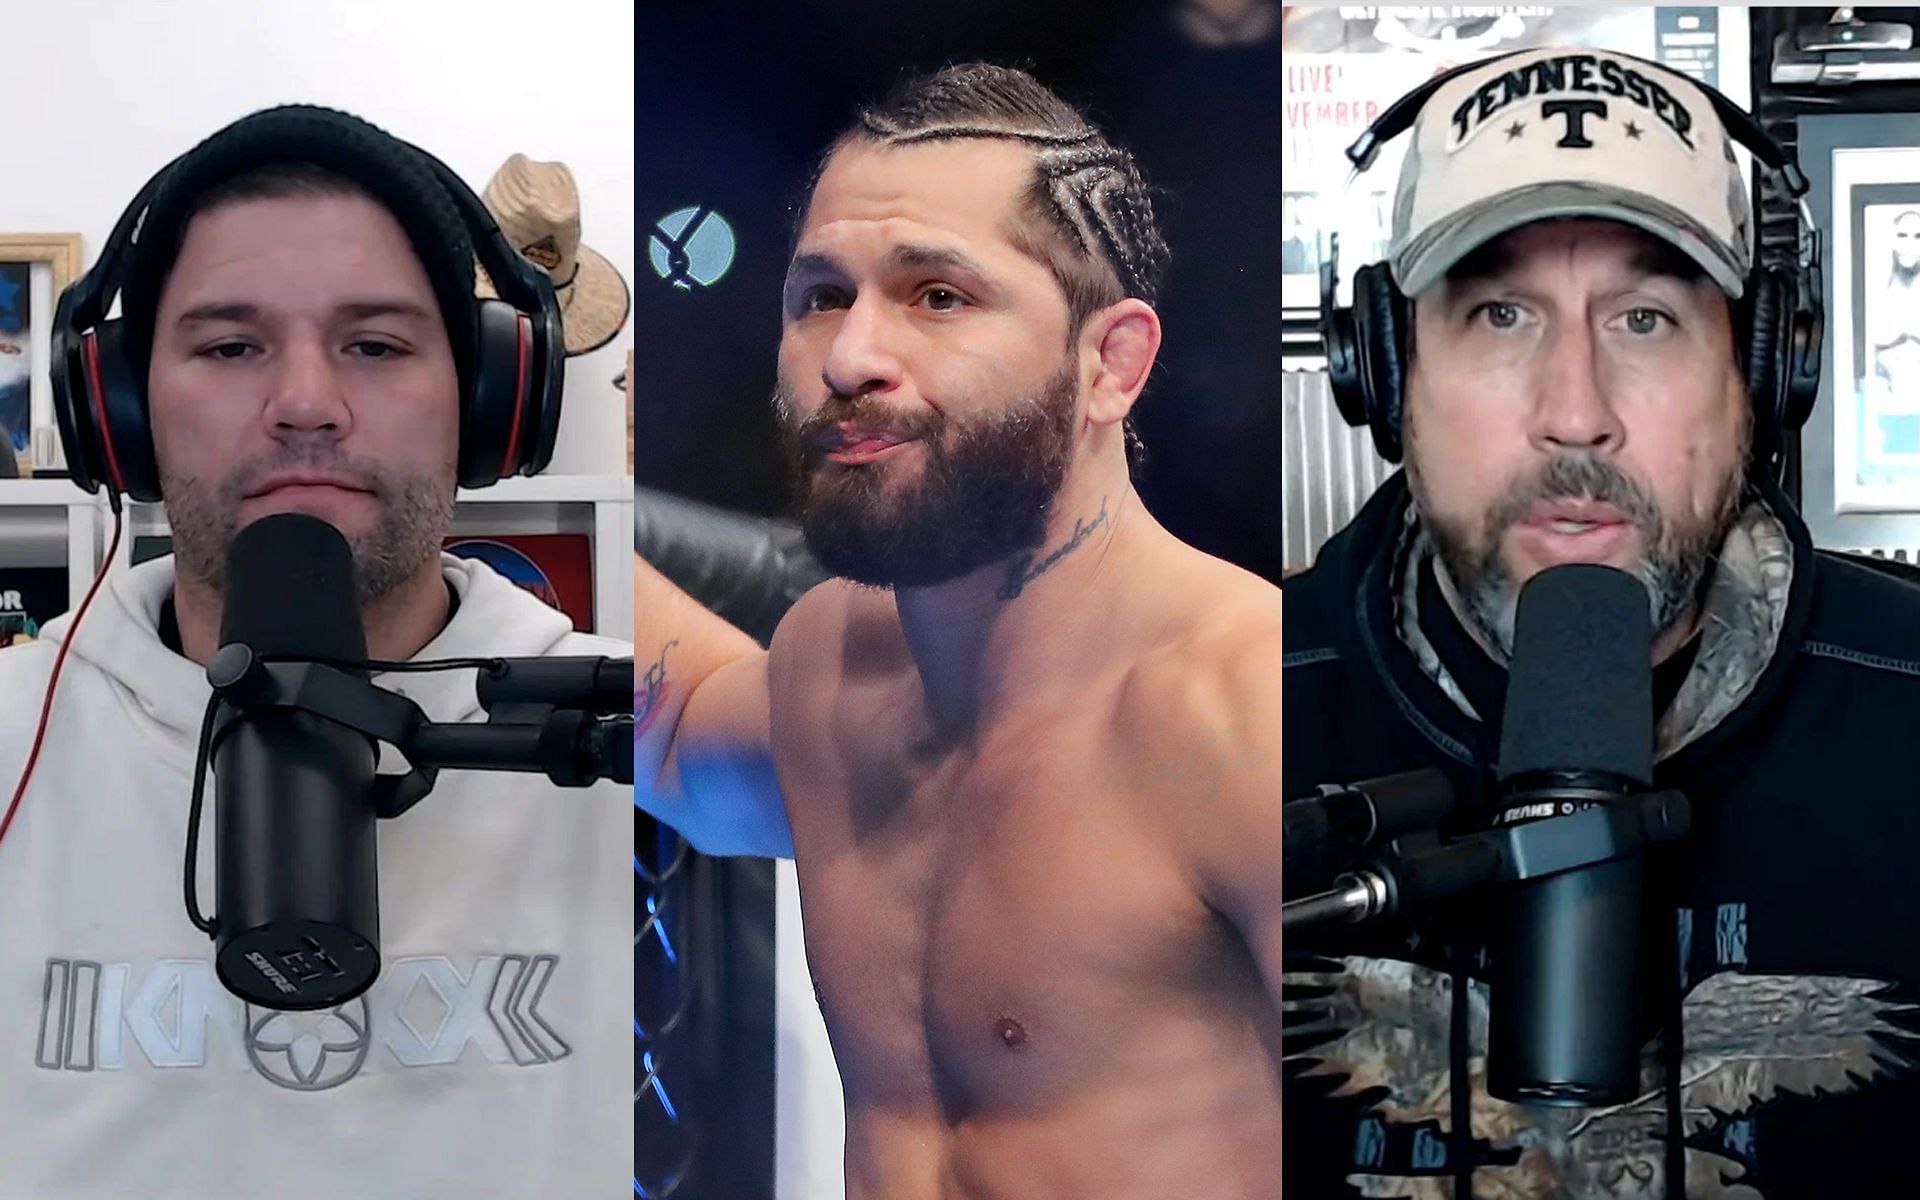 Josh Thomson (left), Jorge Masvidal (center), and John McCarthy (right) (Images via YouTube/Weighing In and Getty)